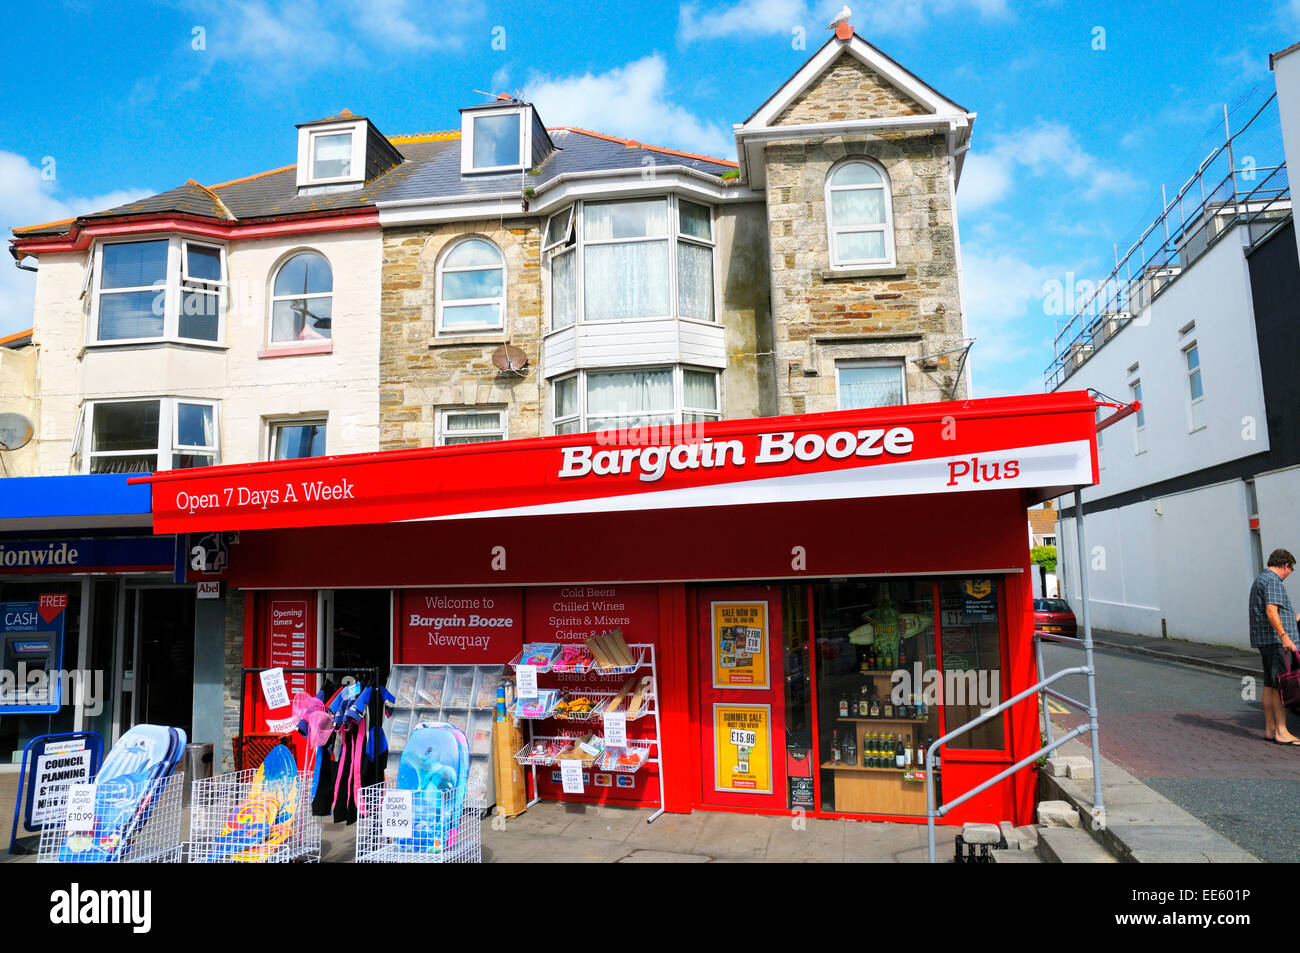 Bargain Booze off licence, Newquay, Cornwall, UK Banque D'Images